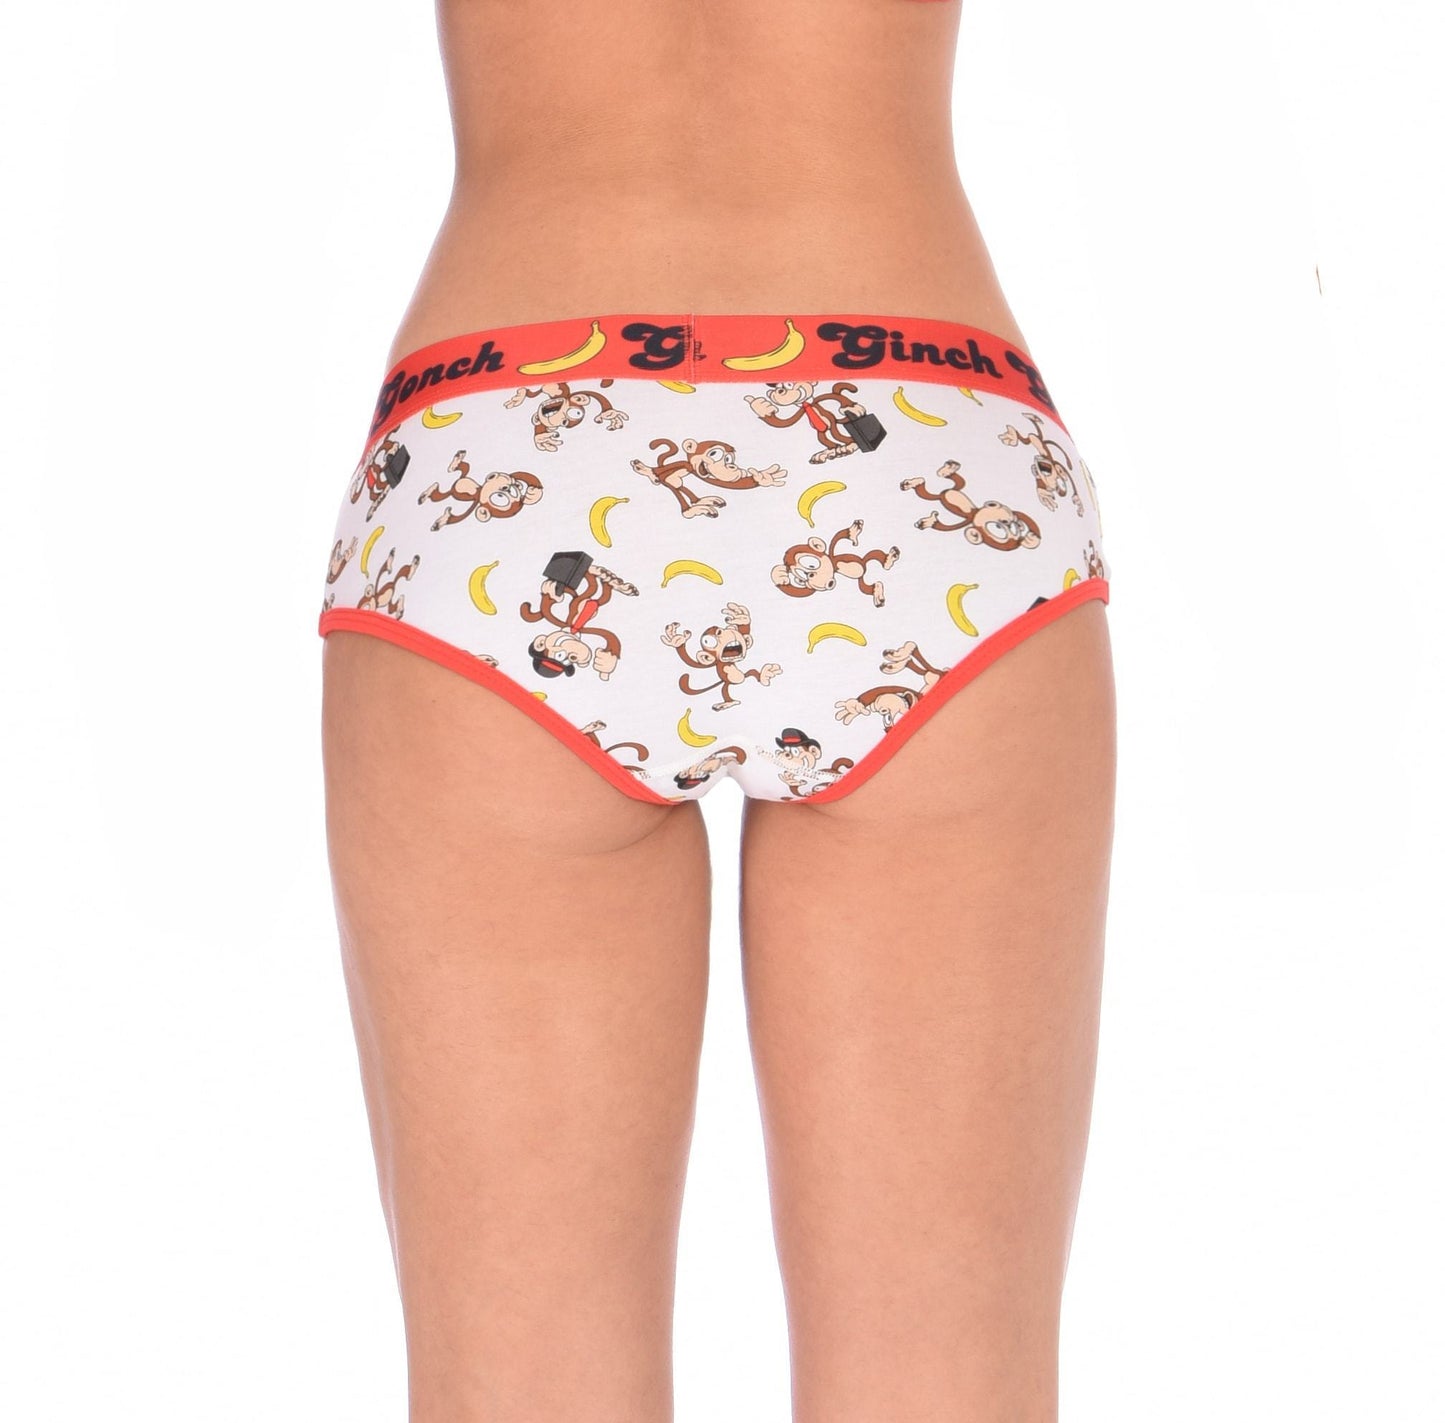 GG Ginch Gonch Gone Bananas boy cut Brief women's underwear y front white fabric with monkeys and bananas red trim and red printed waistband back